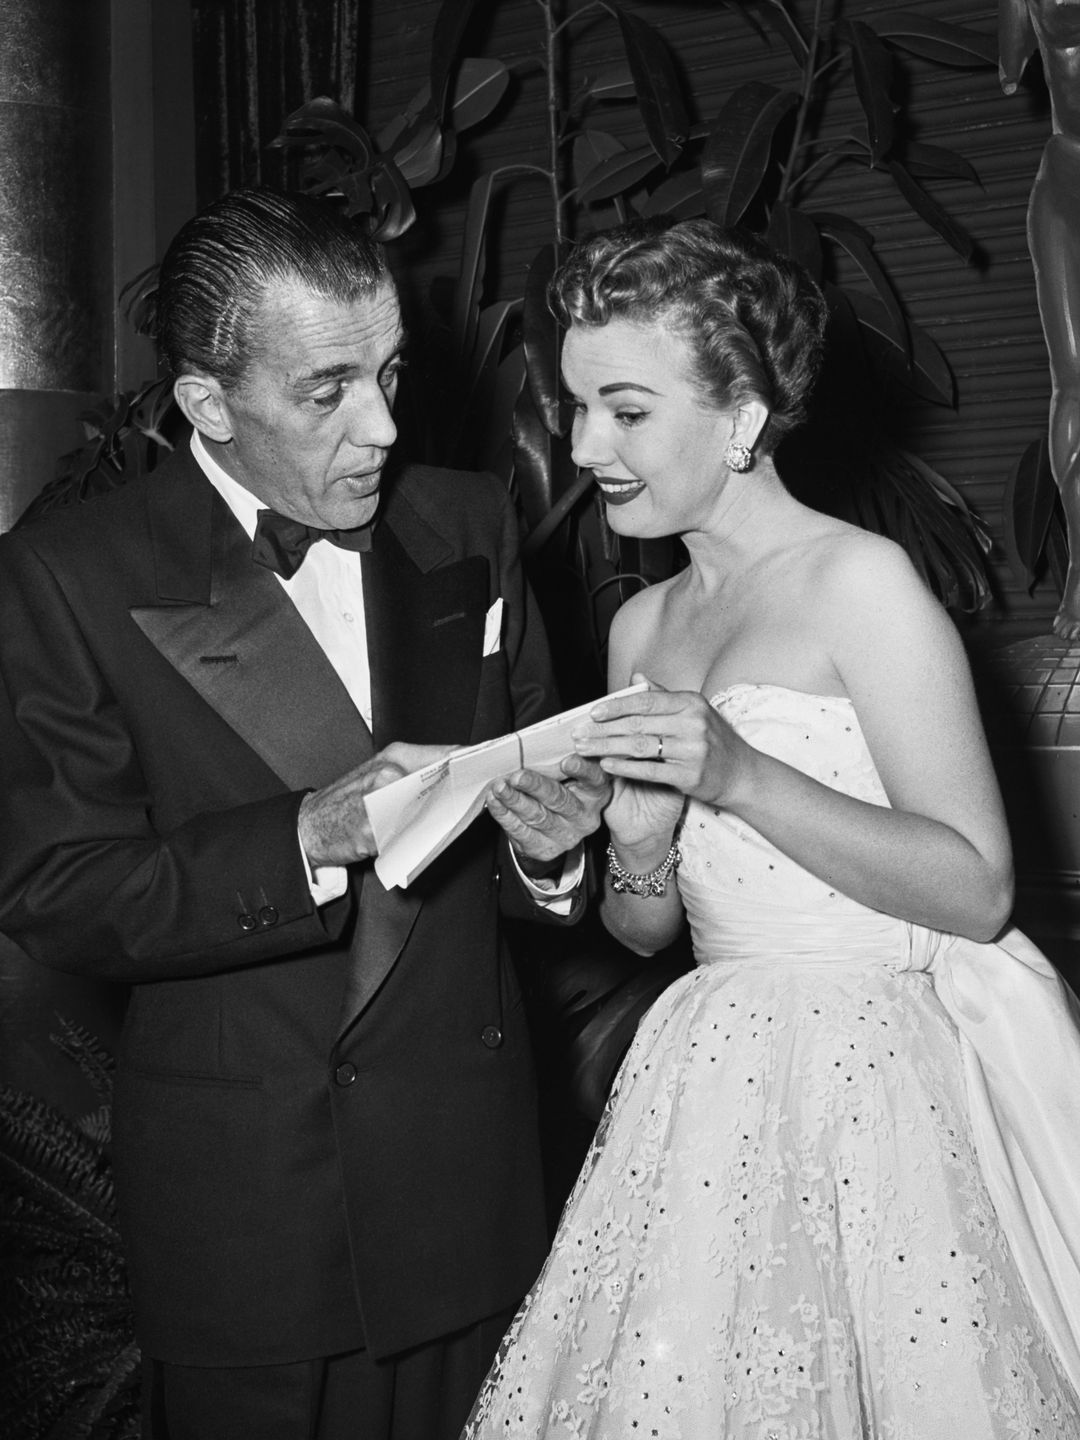 American television presenter and journalist Ed Sullivan (1901-1974), wearing a tuxedo and bow tie, with American actress and singer Gale Storm (1922-2009), wearing an off-the-shoulder evening gown, attend an Emmy awards ceremony, United States, circa 1955. (Photo by Frank Worth/Graphic House/Archive Photos/Getty Images)